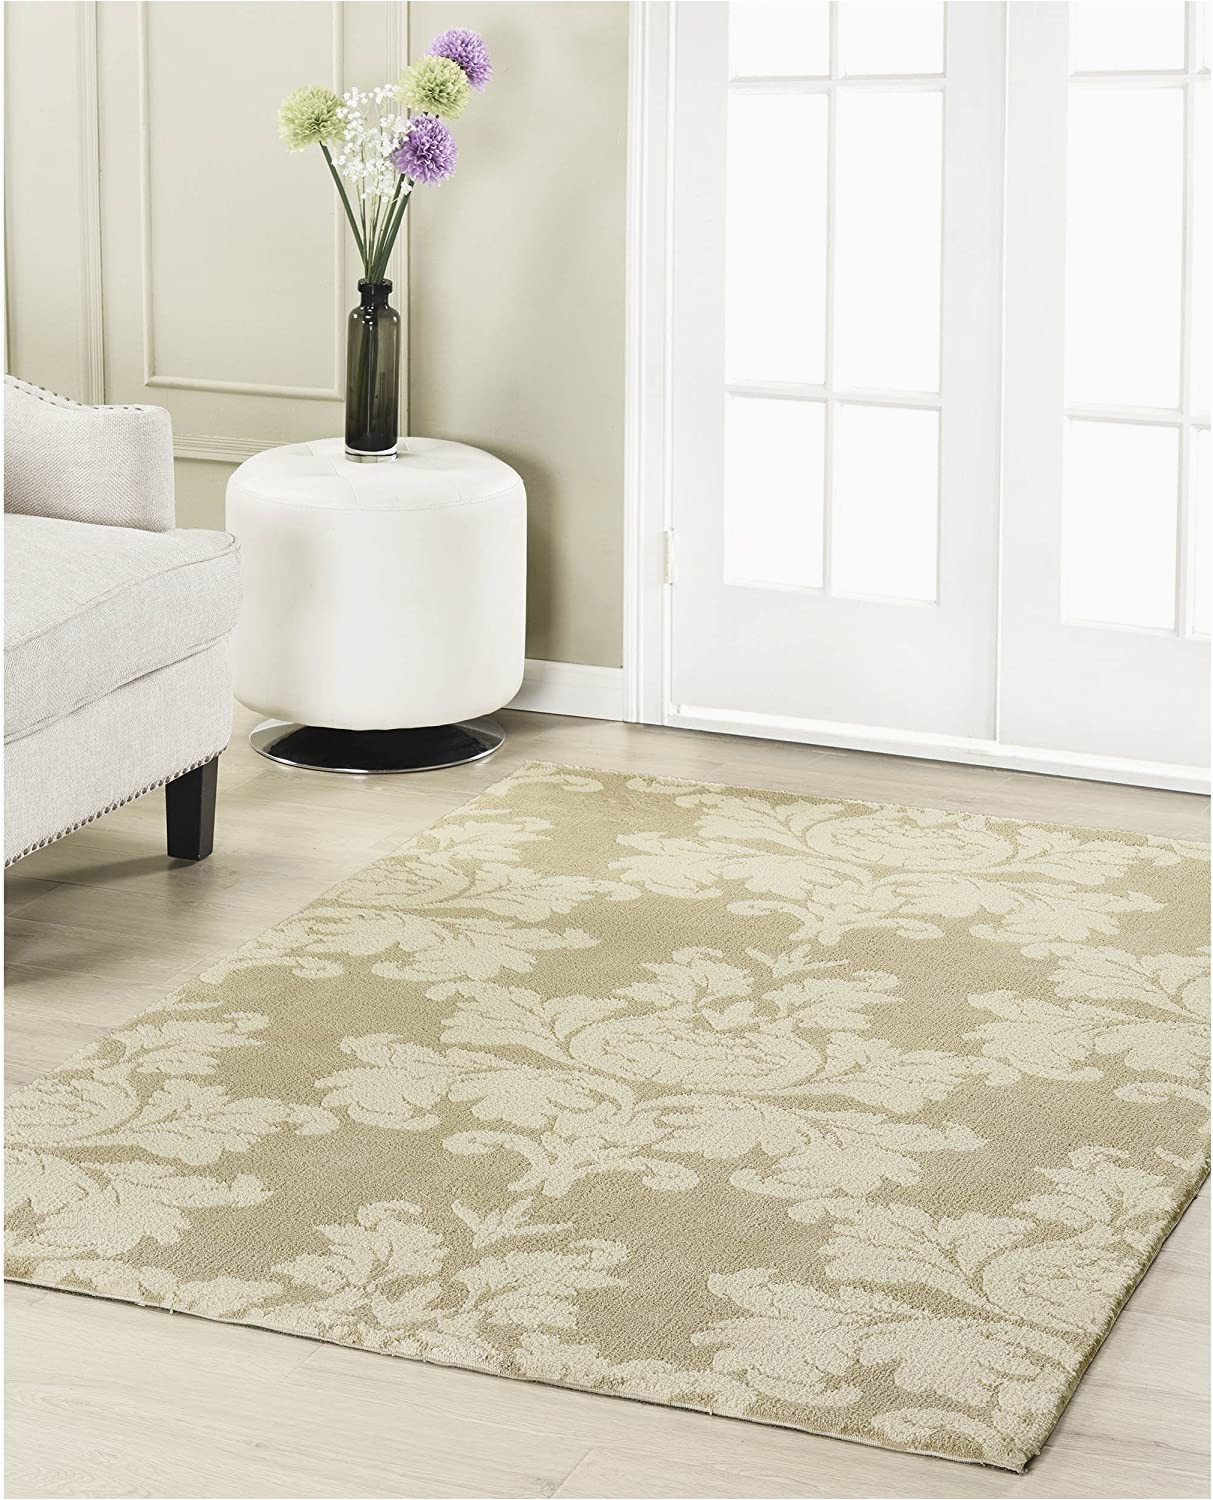 Laura ashley 8×10 area Rugs Laura ashley Kent Plush Knit Microfiber 24" X 48" Accent Rug Taupe